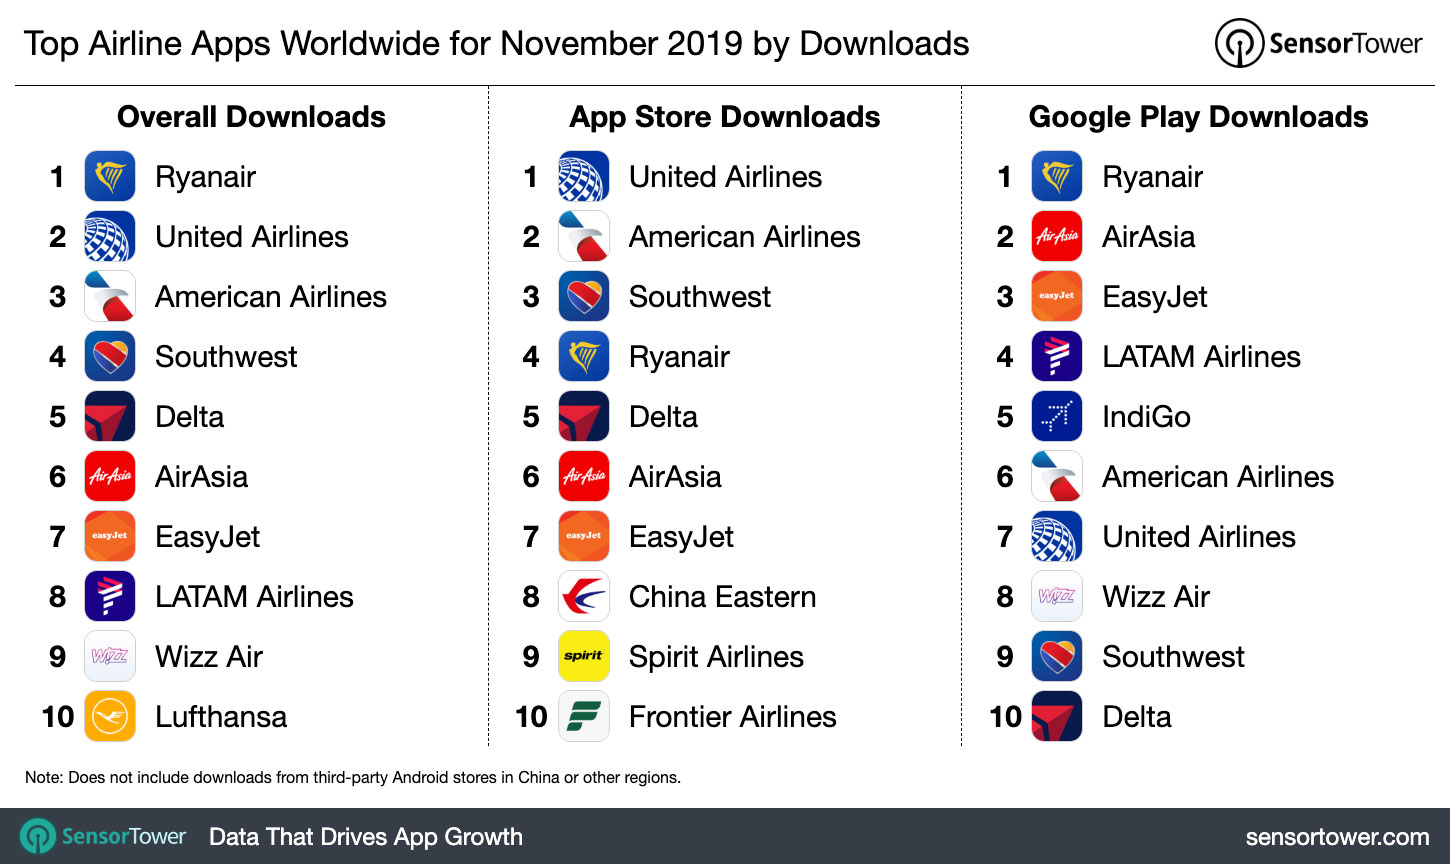 Top Airline Apps Worldwide for November 2019 by Downloads